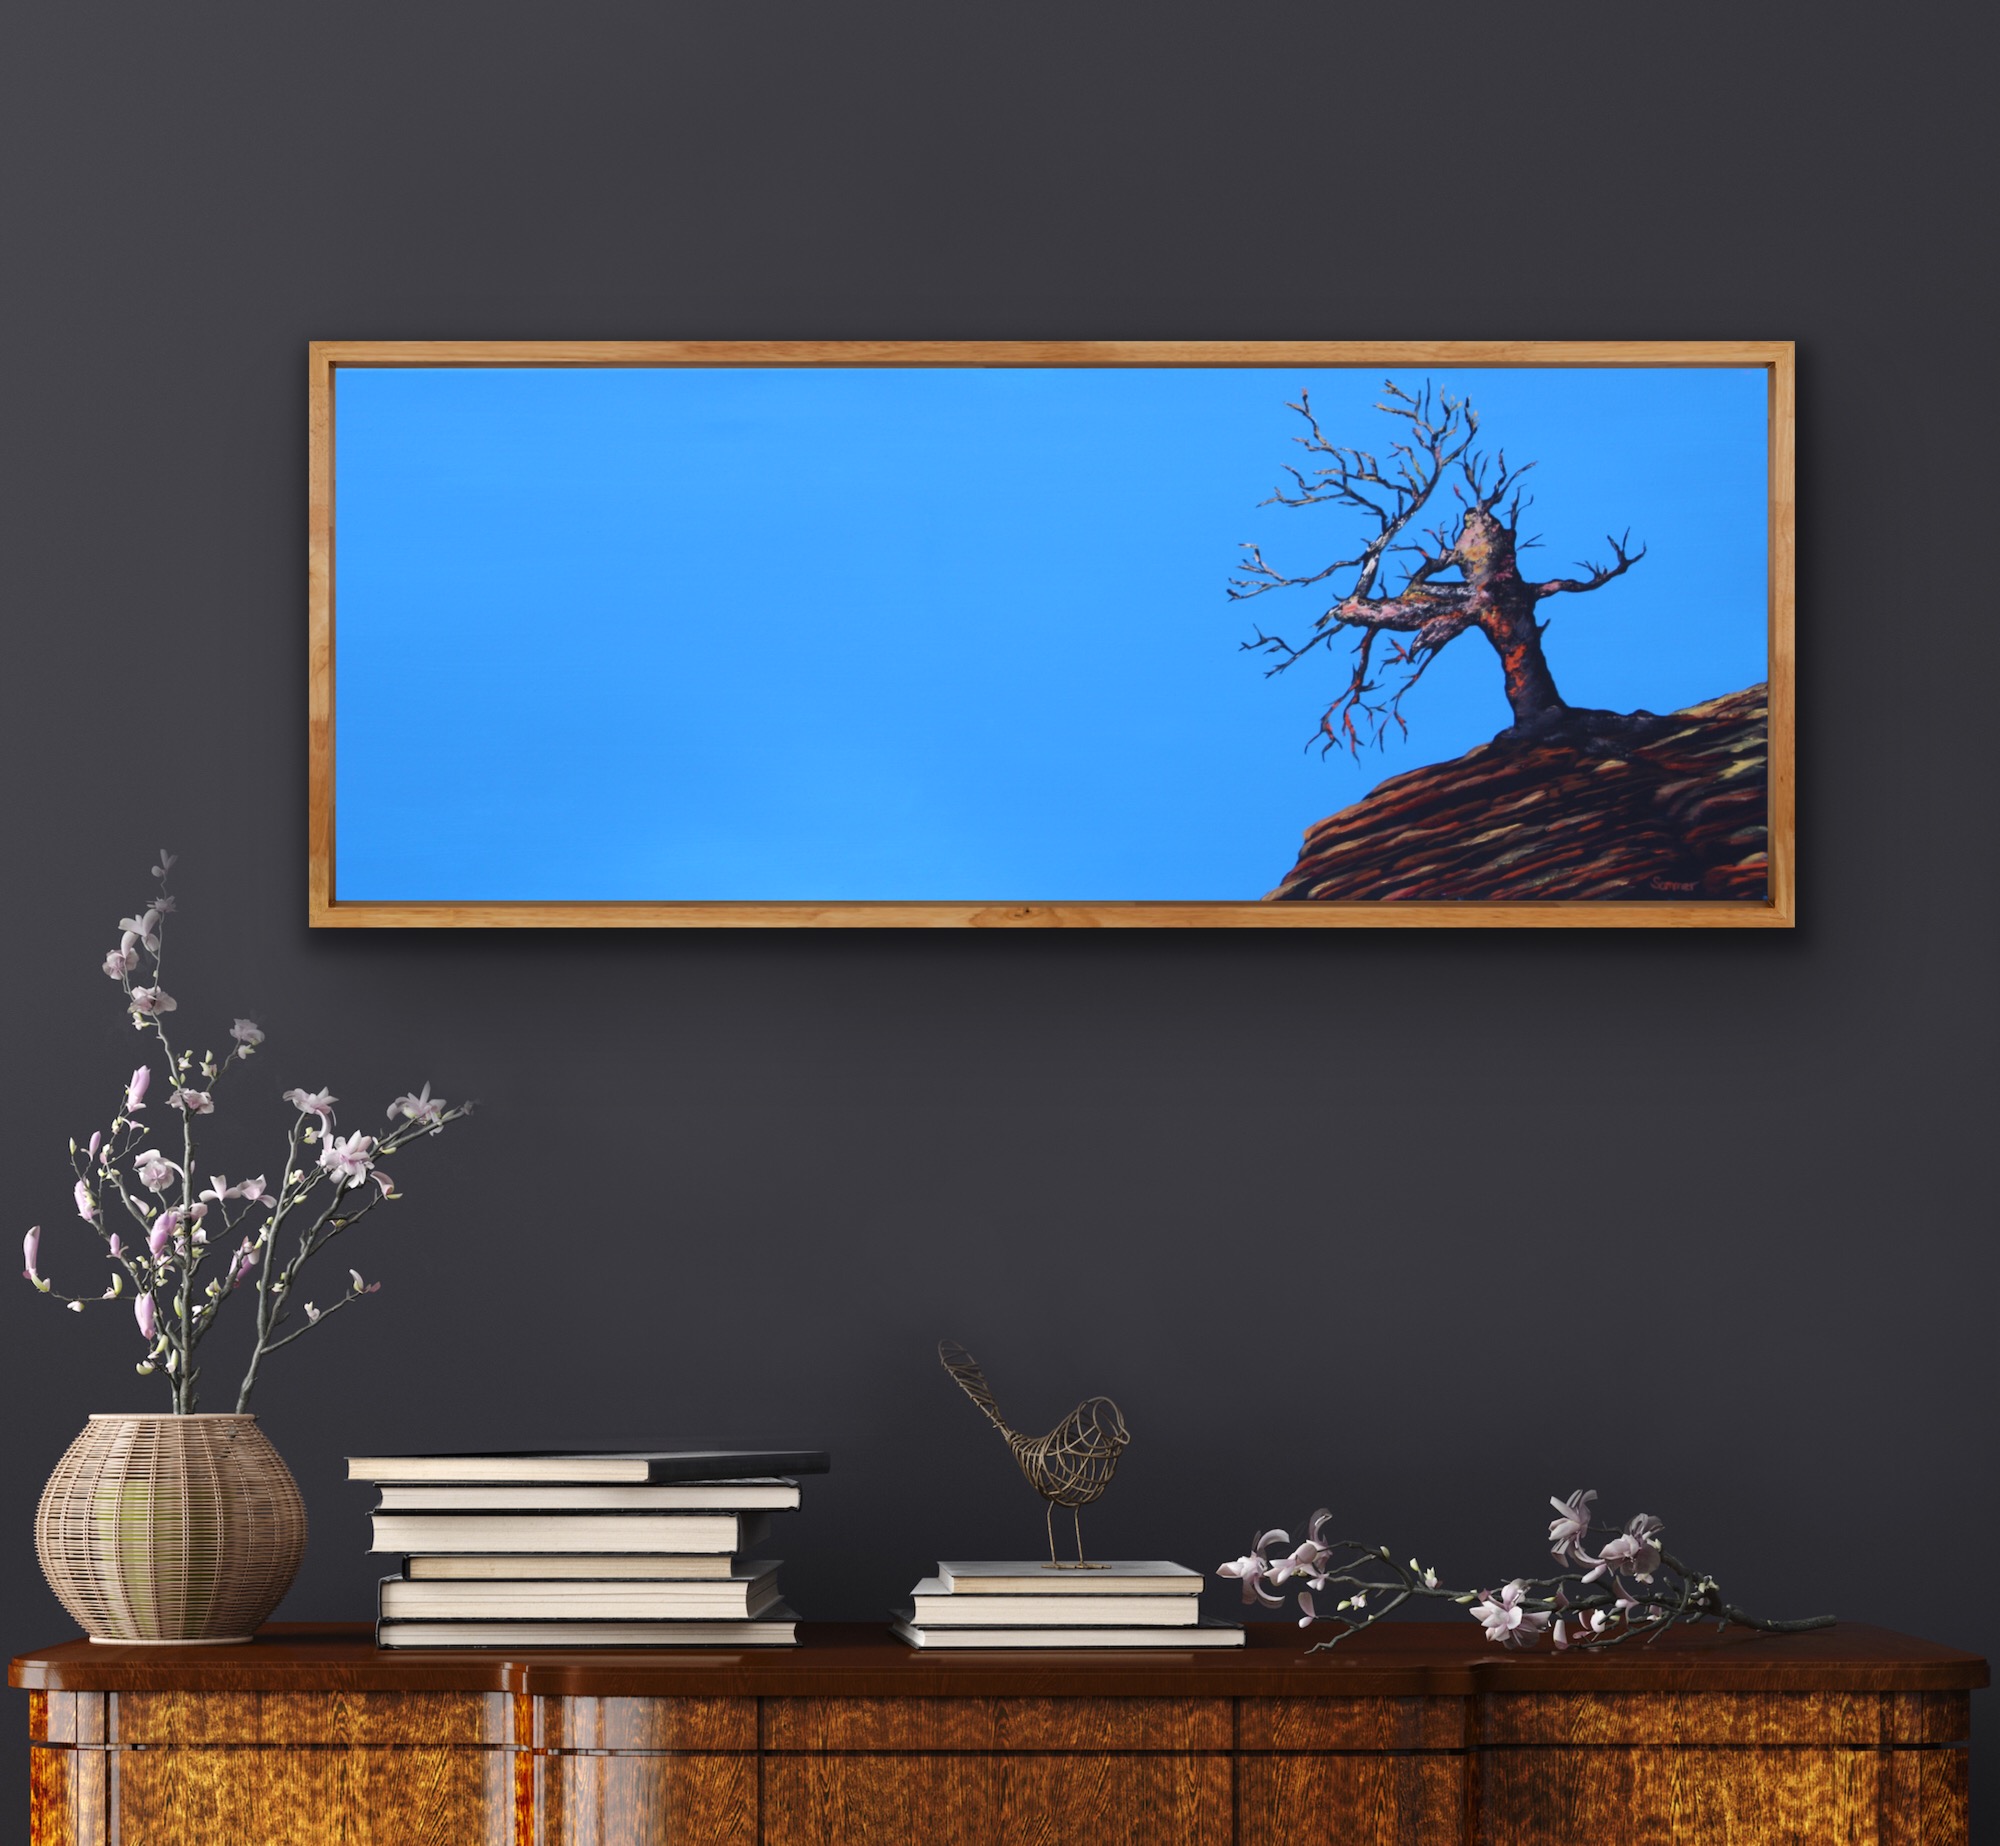 0000 Lonely Tree, 2011 | oil on canvas, 40 x 120 cm, 200 EUR